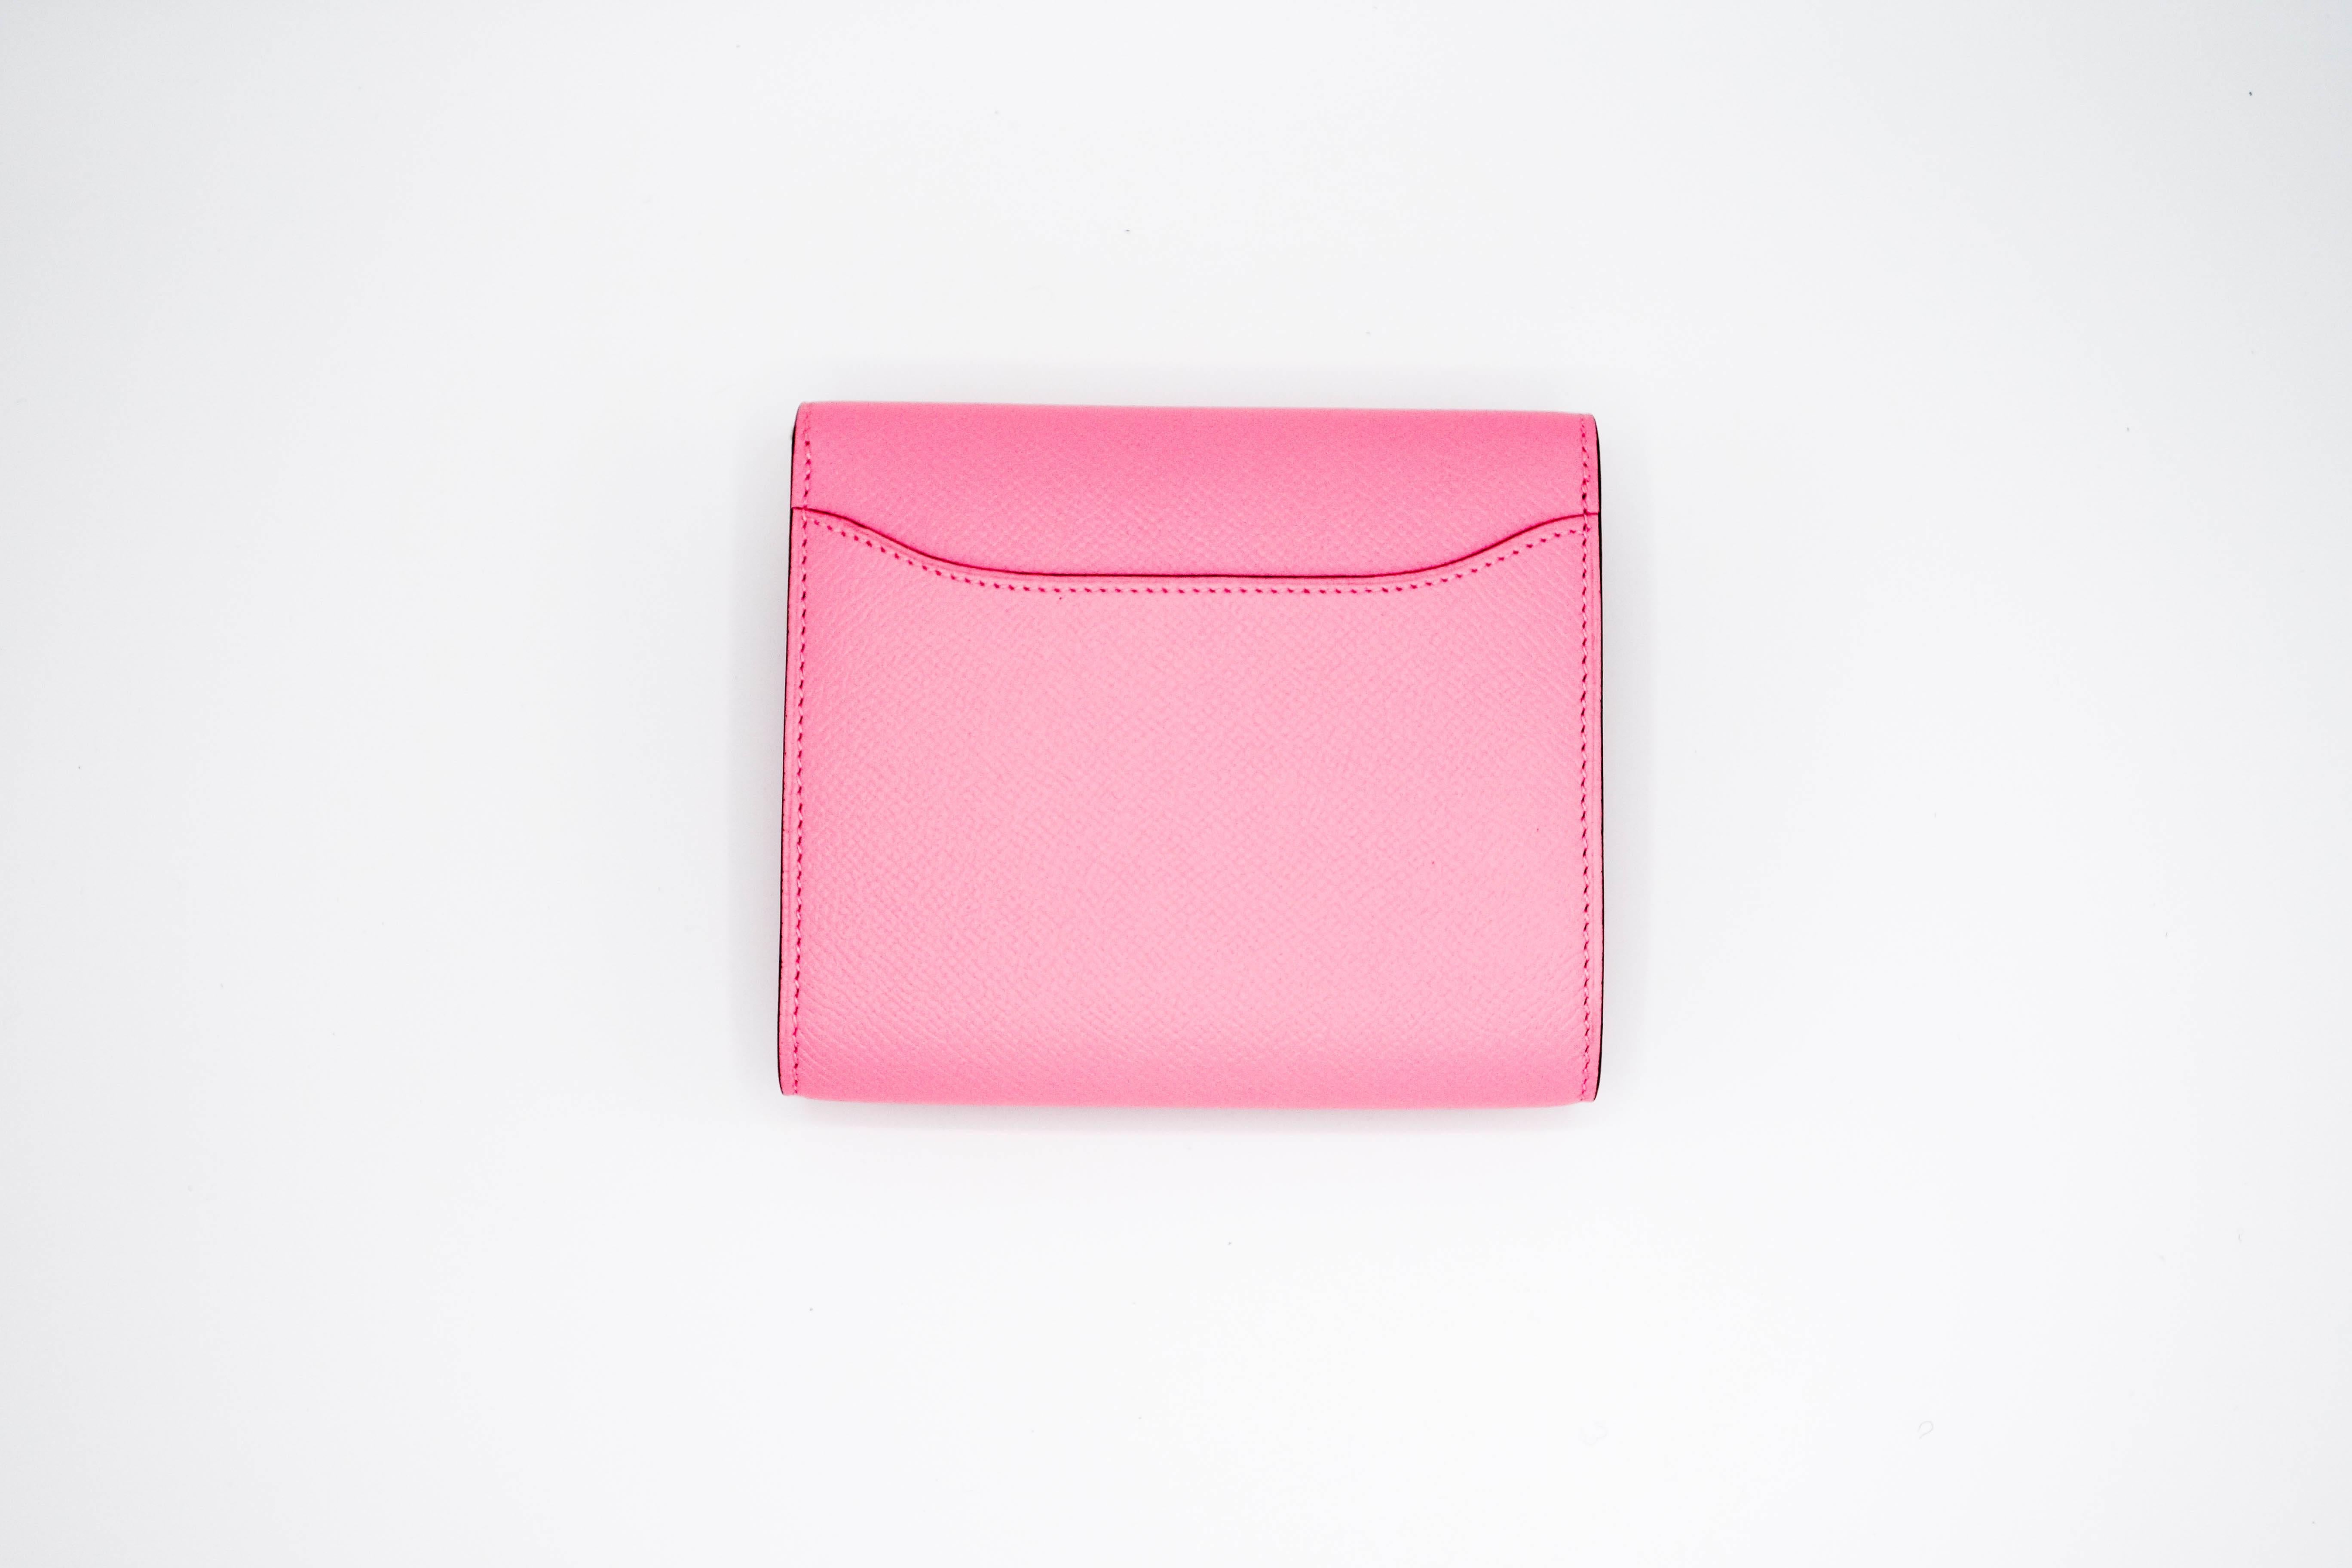 Rare, beautiful, store-fresh Hermes Constance compact wallet in Rose Confetti Epsom leather with palladium hardware. The wallet features pink stitching, the iconic "H" snap lock closure, and a rear exterior pocket. 

This item is NEW and